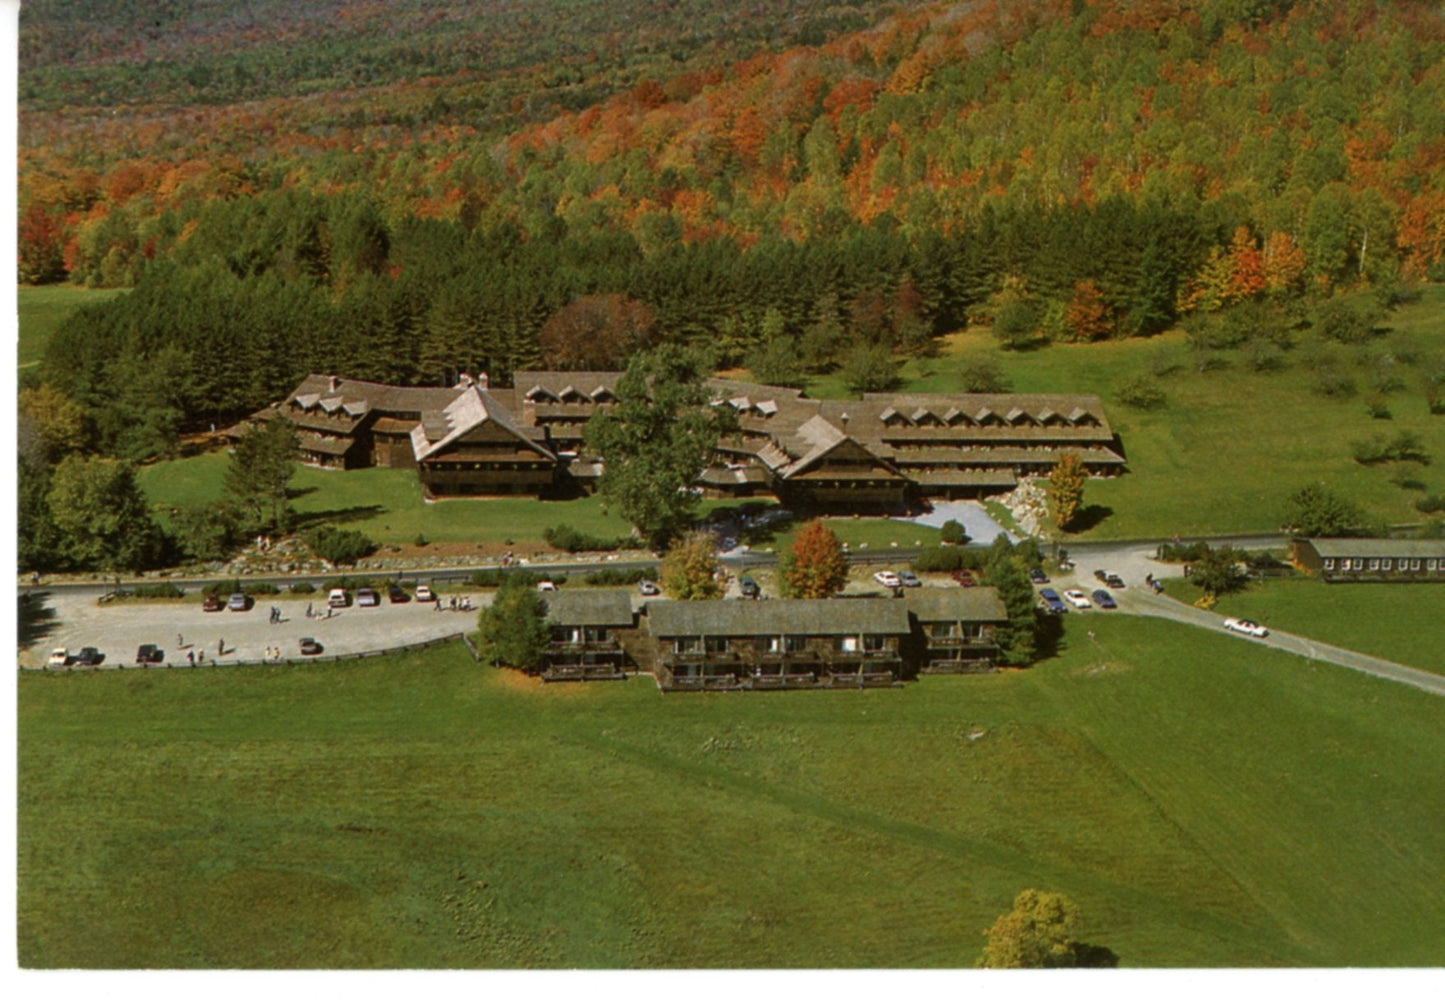 Trapp Family Lodge and Guest Houses STOWE VERMONT Aerial Photo Large Postcard 6" x 4"